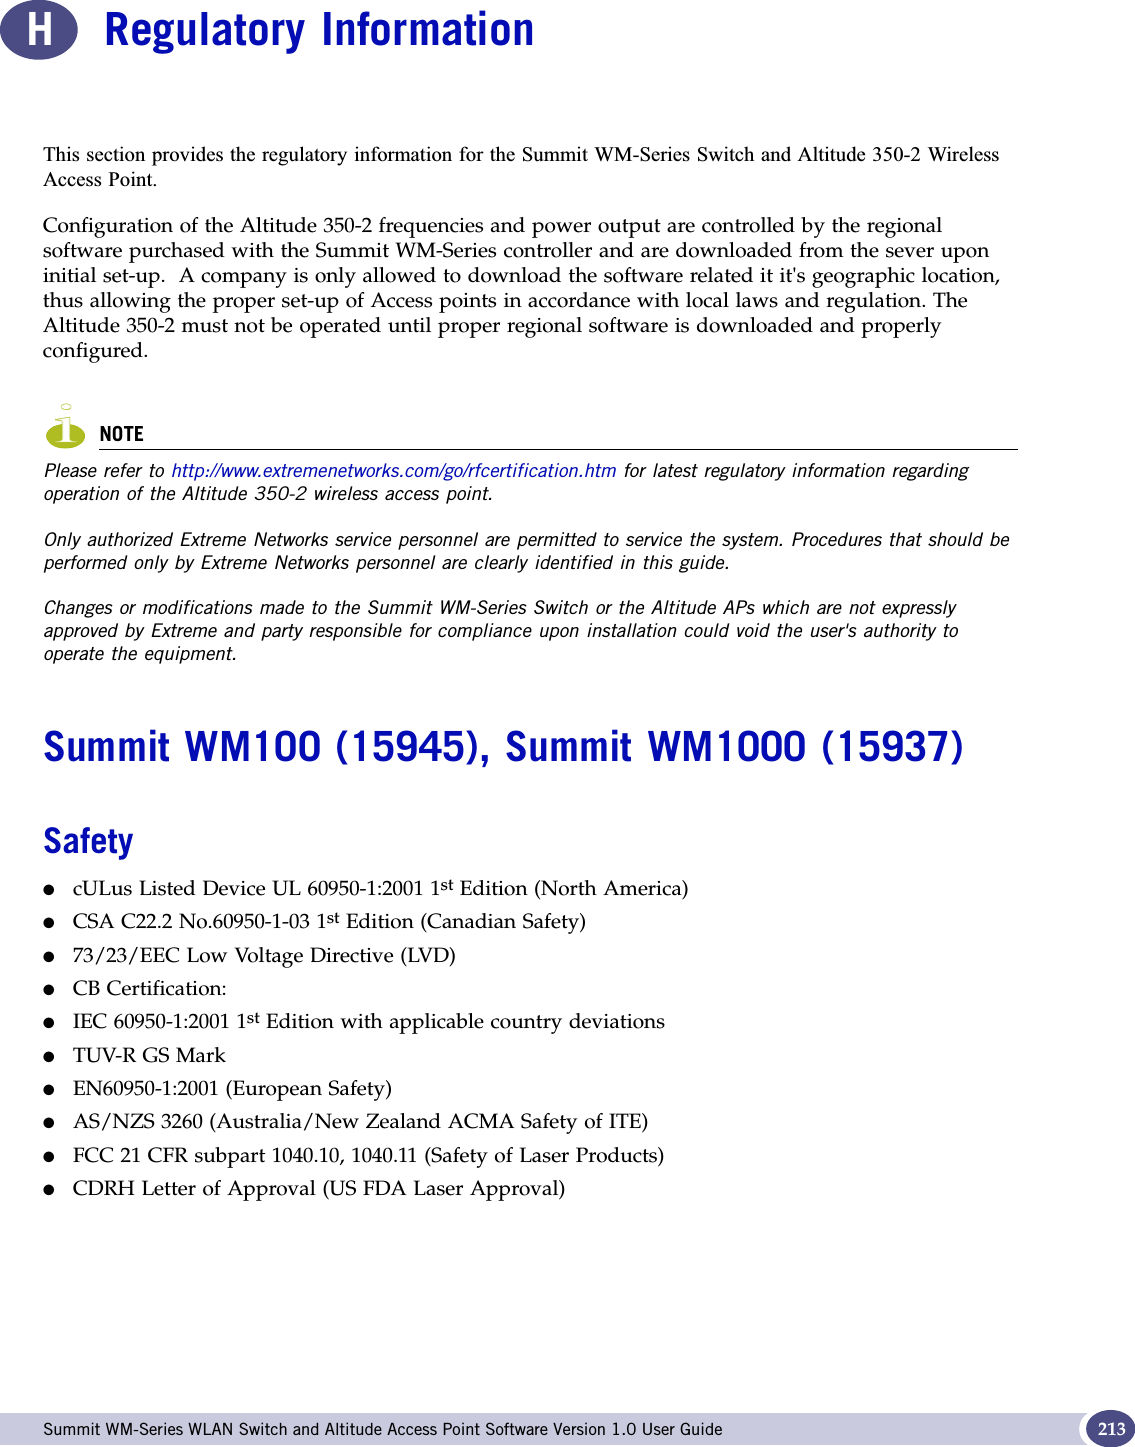  Summit WM-Series WLAN Switch and Altitude Access Point Software Version 1.0 User Guide 213HRegulatory Information7KLVVHFWLRQSURYLGHVWKHUHJXODWRU\LQIRUPDWLRQIRUWKH6XPPLW:06HULHV6ZLWFKDQG$OWLWXGH:LUHOHVV$FFHVV3RLQWConfiguration of the Altitude 350-2 frequencies and power output are controlled by the regional software purchased with the Summit WM-Series controller and are downloaded from the sever upon initial set-up.  A company is only allowed to download the software related it it&apos;s geographic location, thus allowing the proper set-up of Access points in accordance with local laws and regulation. The Altitude 350-2 must not be operated until proper regional software is downloaded and properly configured.NOTEPlease refer to http://www.extremenetworks.com/go/rfcertification.htm for latest regulatory information regarding operation of the Altitude 350-2 wireless access point. Only authorized Extreme Networks service personnel are permitted to service the system. Procedures that should be performed only by Extreme Networks personnel are clearly identified in this guide.Changes or modifications made to the Summit WM-Series Switch or the Altitude APs which are not expressly approved by Extreme and party responsible for compliance upon installation could void the user&apos;s authority to operate the equipment.Summit WM100 (15945), Summit WM1000 (15937)Safety●cULus Listed Device UL 60950-1:2001 1st Edition (North America)●CSA C22.2 No.60950-1-03 1st Edition (Canadian Safety)●73/23/EEC Low Voltage Directive (LVD)●CB Certification:●IEC 60950-1:2001 1st Edition with applicable country deviations●TUV-R GS Mark ●EN60950-1:2001 (European Safety)●AS/NZS 3260 (Australia/New Zealand ACMA Safety of ITE)●FCC 21 CFR subpart 1040.10, 1040.11 (Safety of Laser Products)●CDRH Letter of Approval (US FDA Laser Approval)